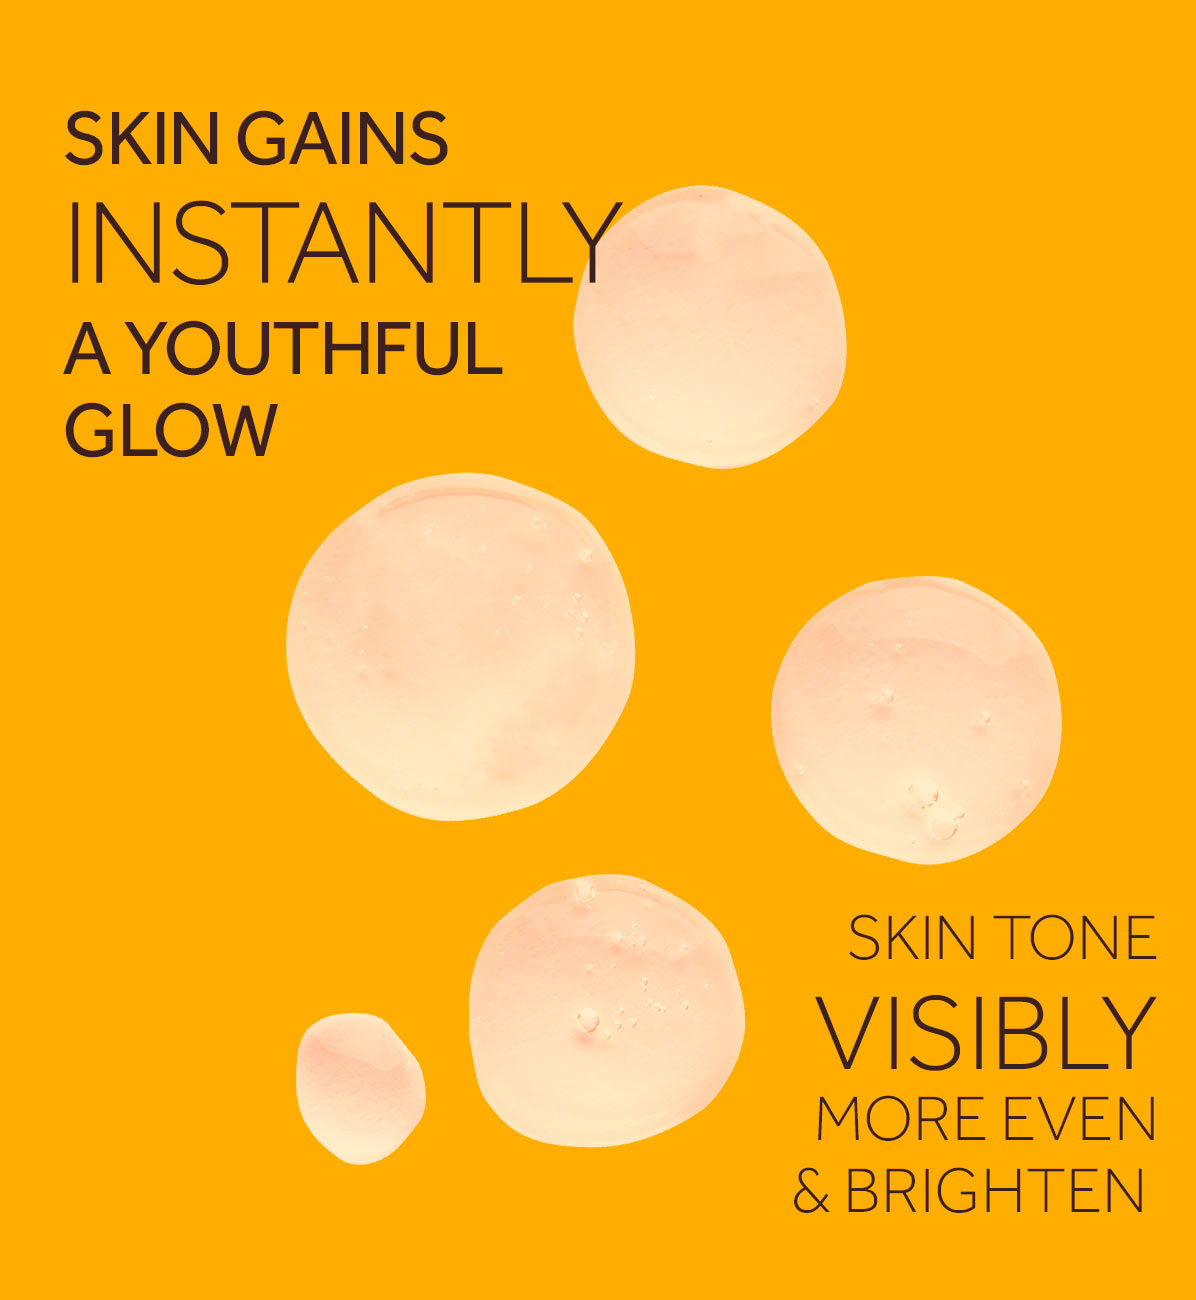 SKIN GAINS INSTANTLY A YOUTHFUL GLOW SKIN TONE VISIBLY MORE EVEN & BRIGHTEN.